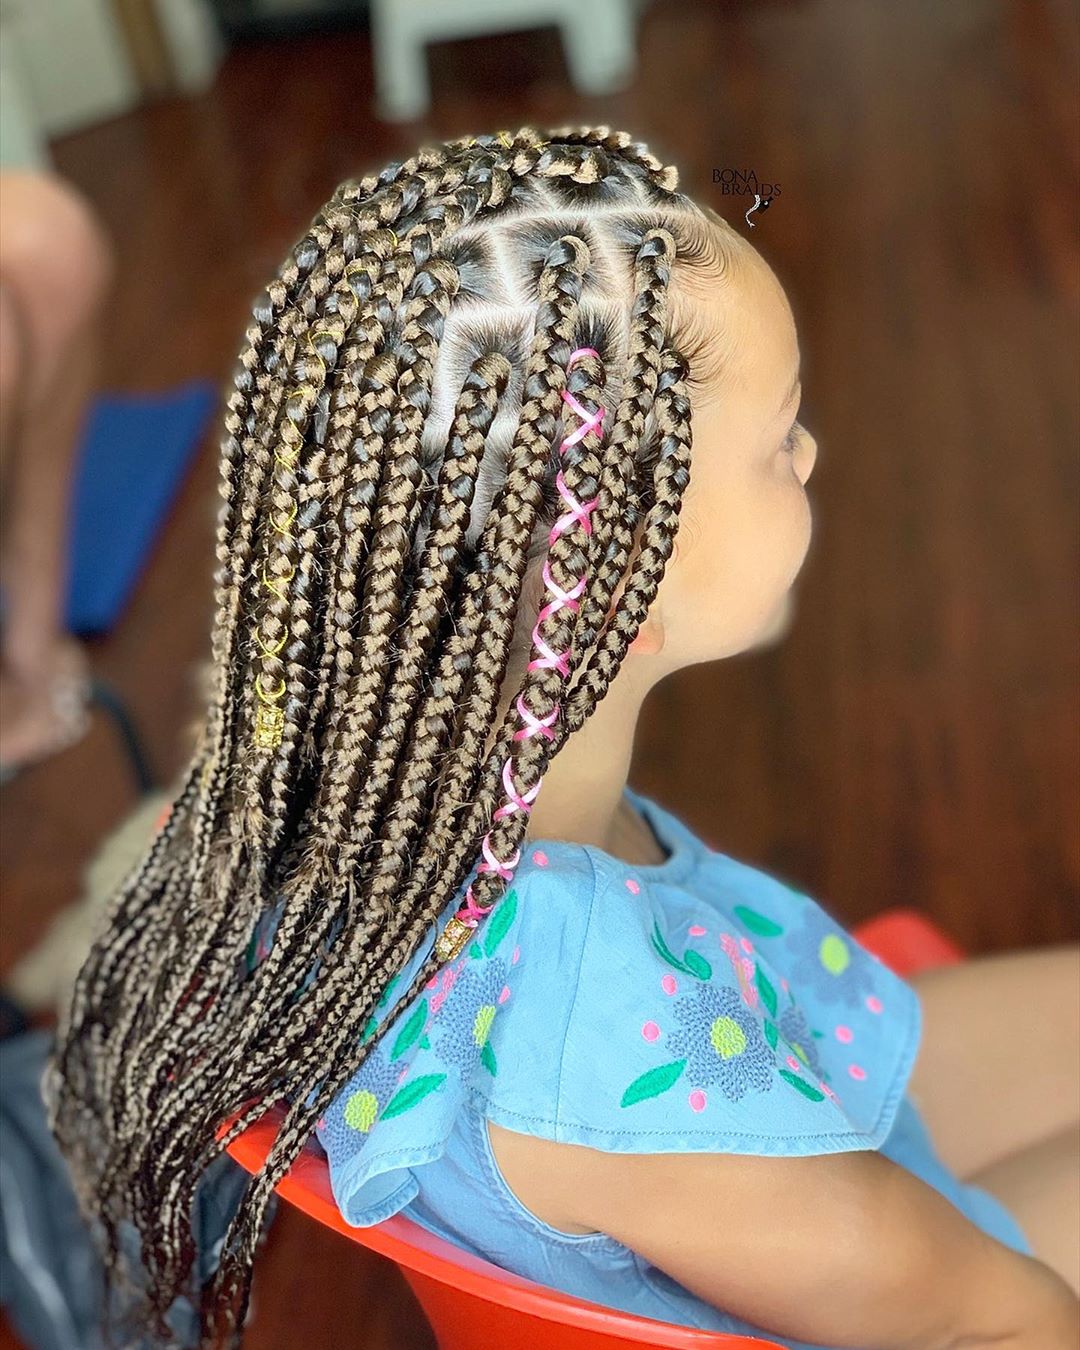 91 gallery Box Braids 2020 Styles Pictures 